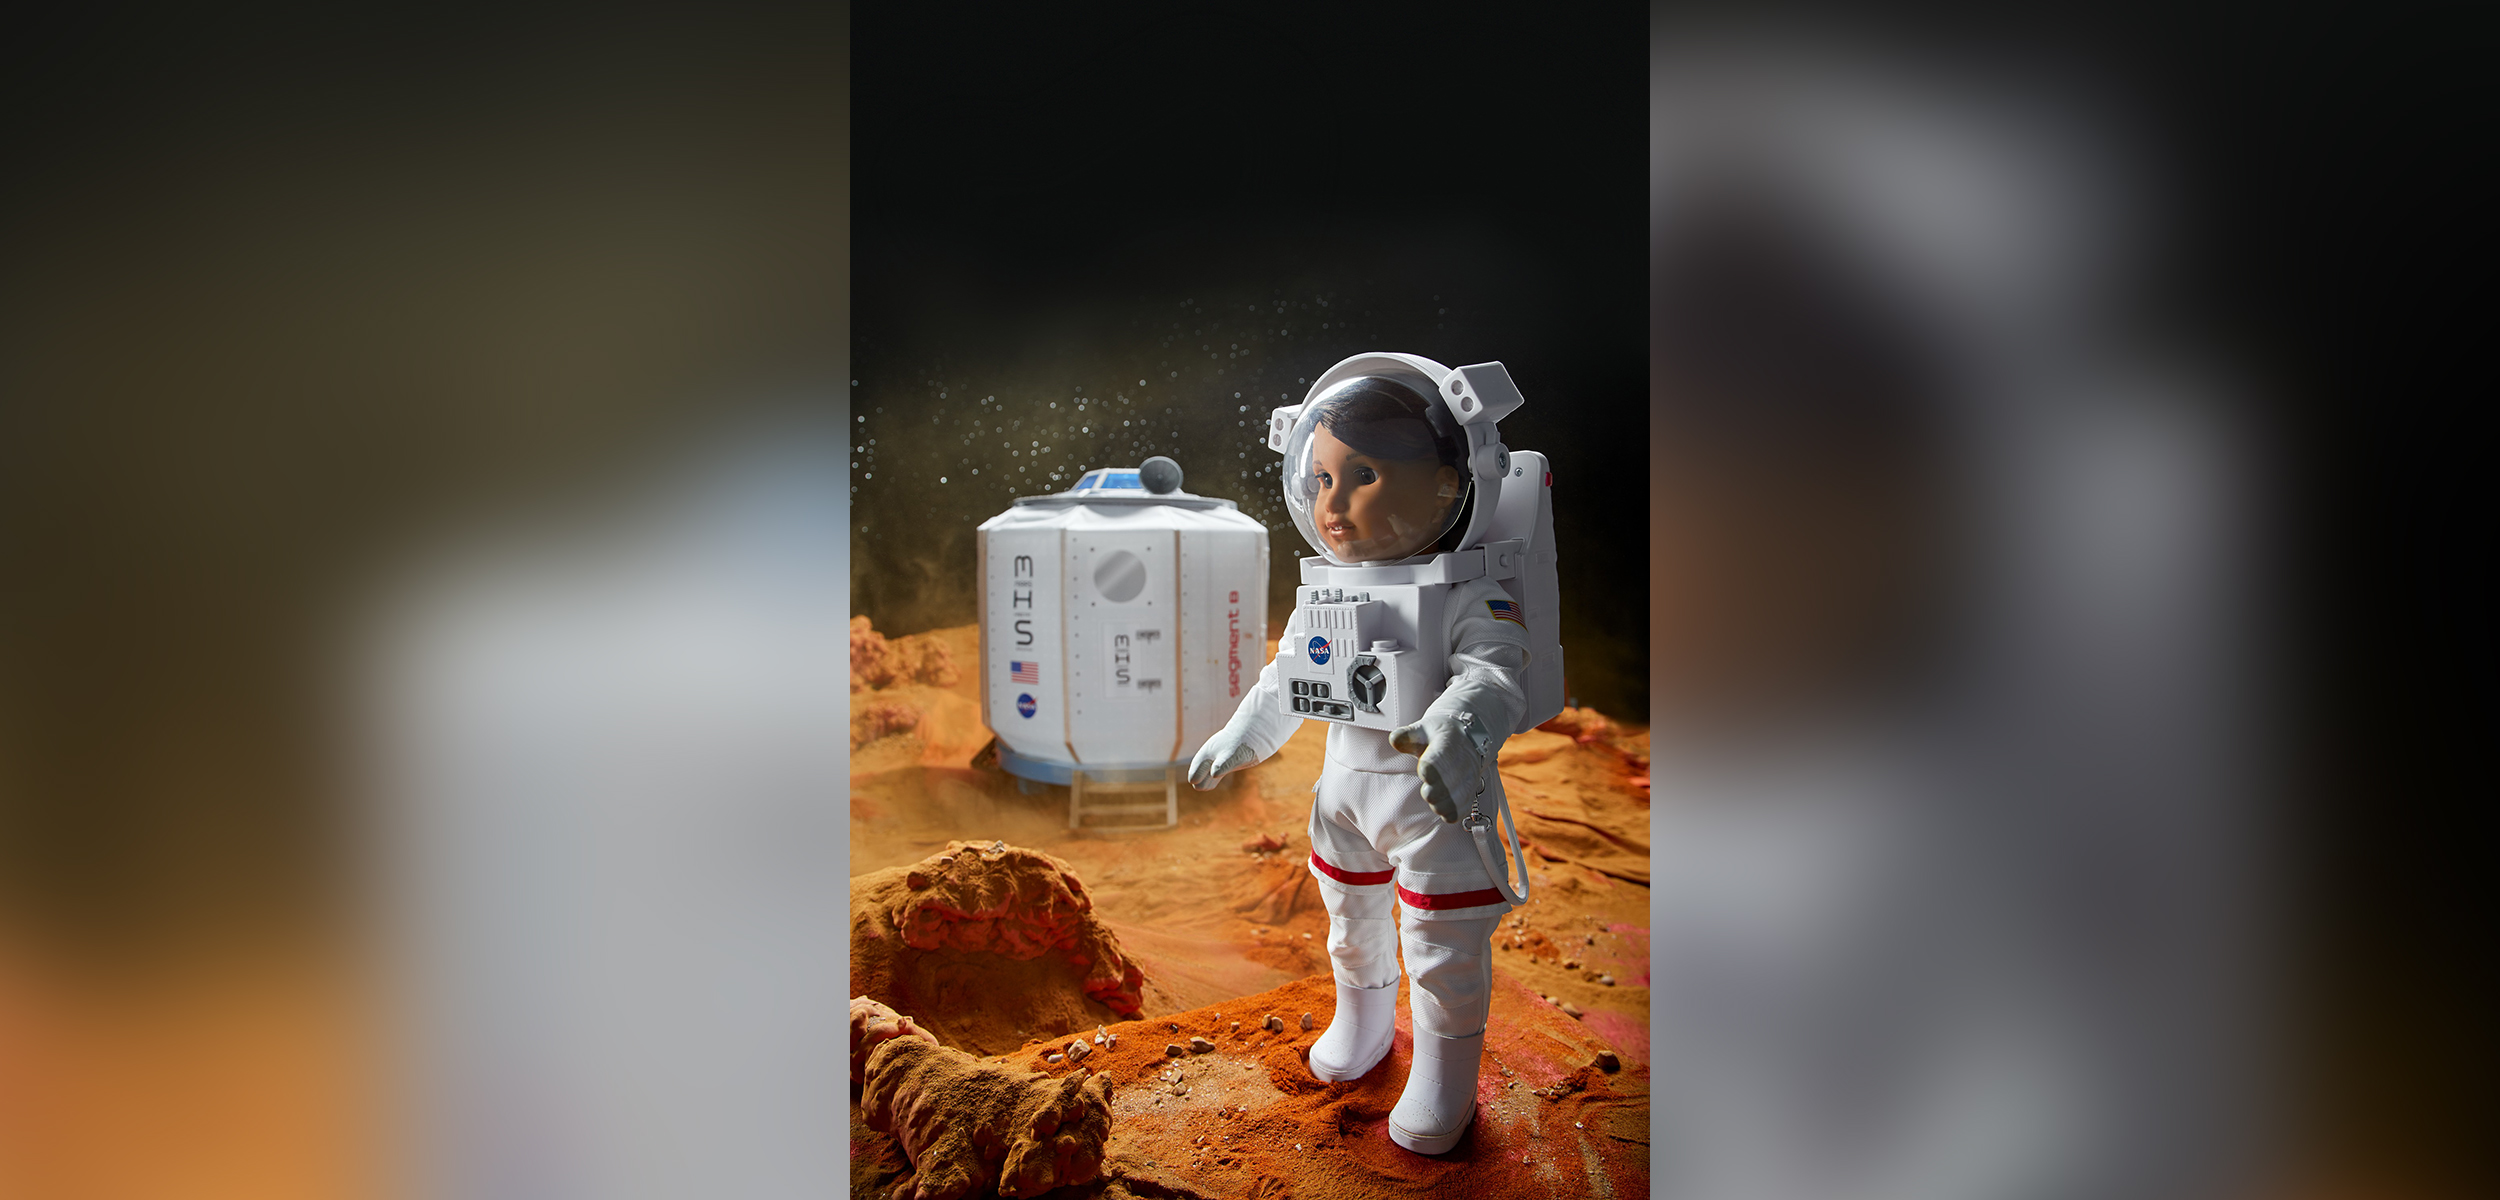 PHOTO:American Girl's 2018 girl of the year doll, who was revealed on "GMA" today, is Luciana Vega, an aspiring astronaut who hopes to be the first person to go to mars. 